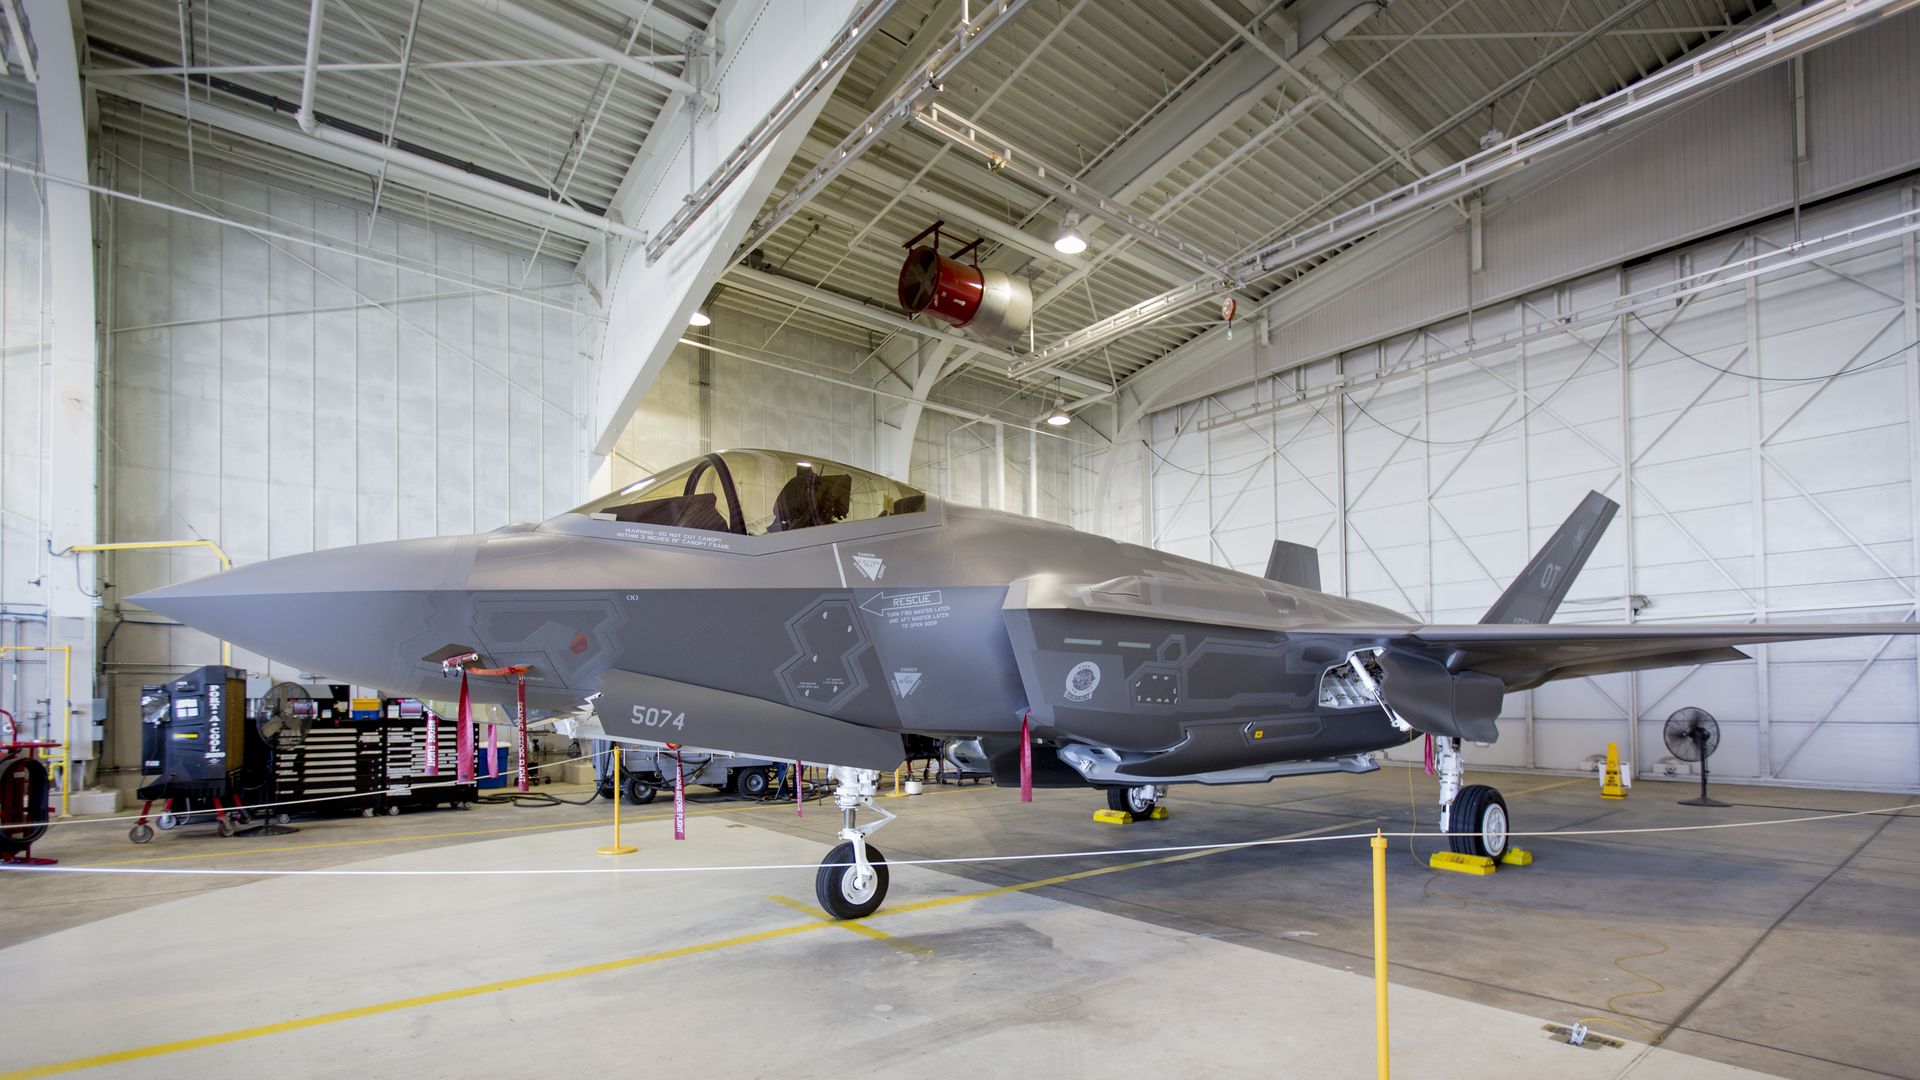 The U.S. has halted delivery of F-35 fighter jet parts to Turkey.